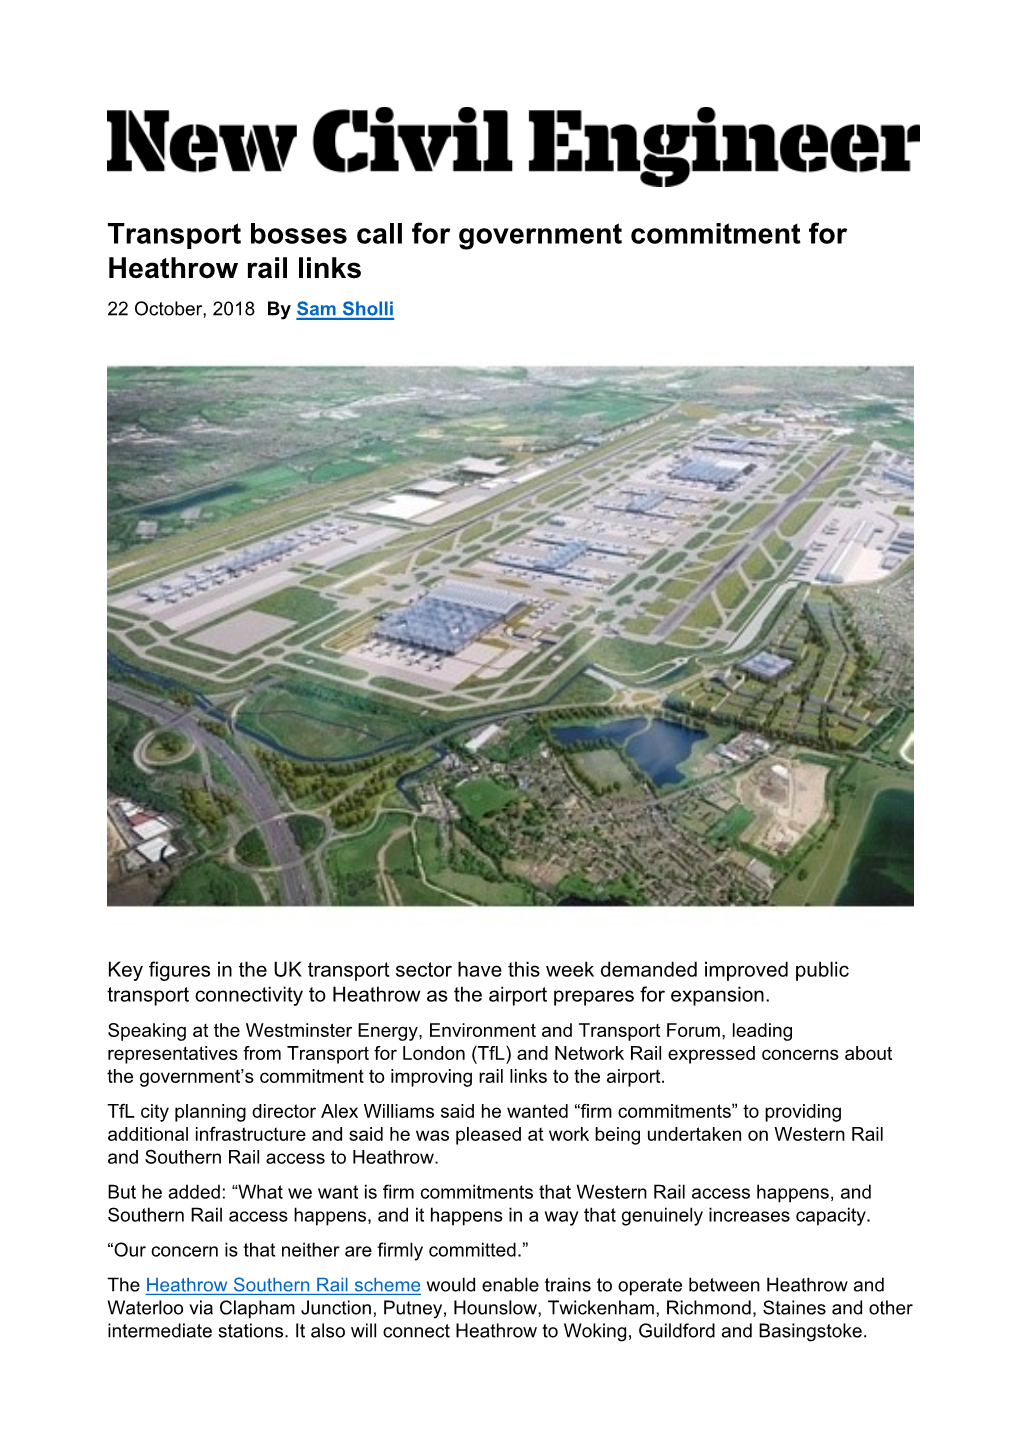 Transport Bosses Call for Government Commitment for Heathrow Rail Links 22 October, 2018 by Sam Sholli